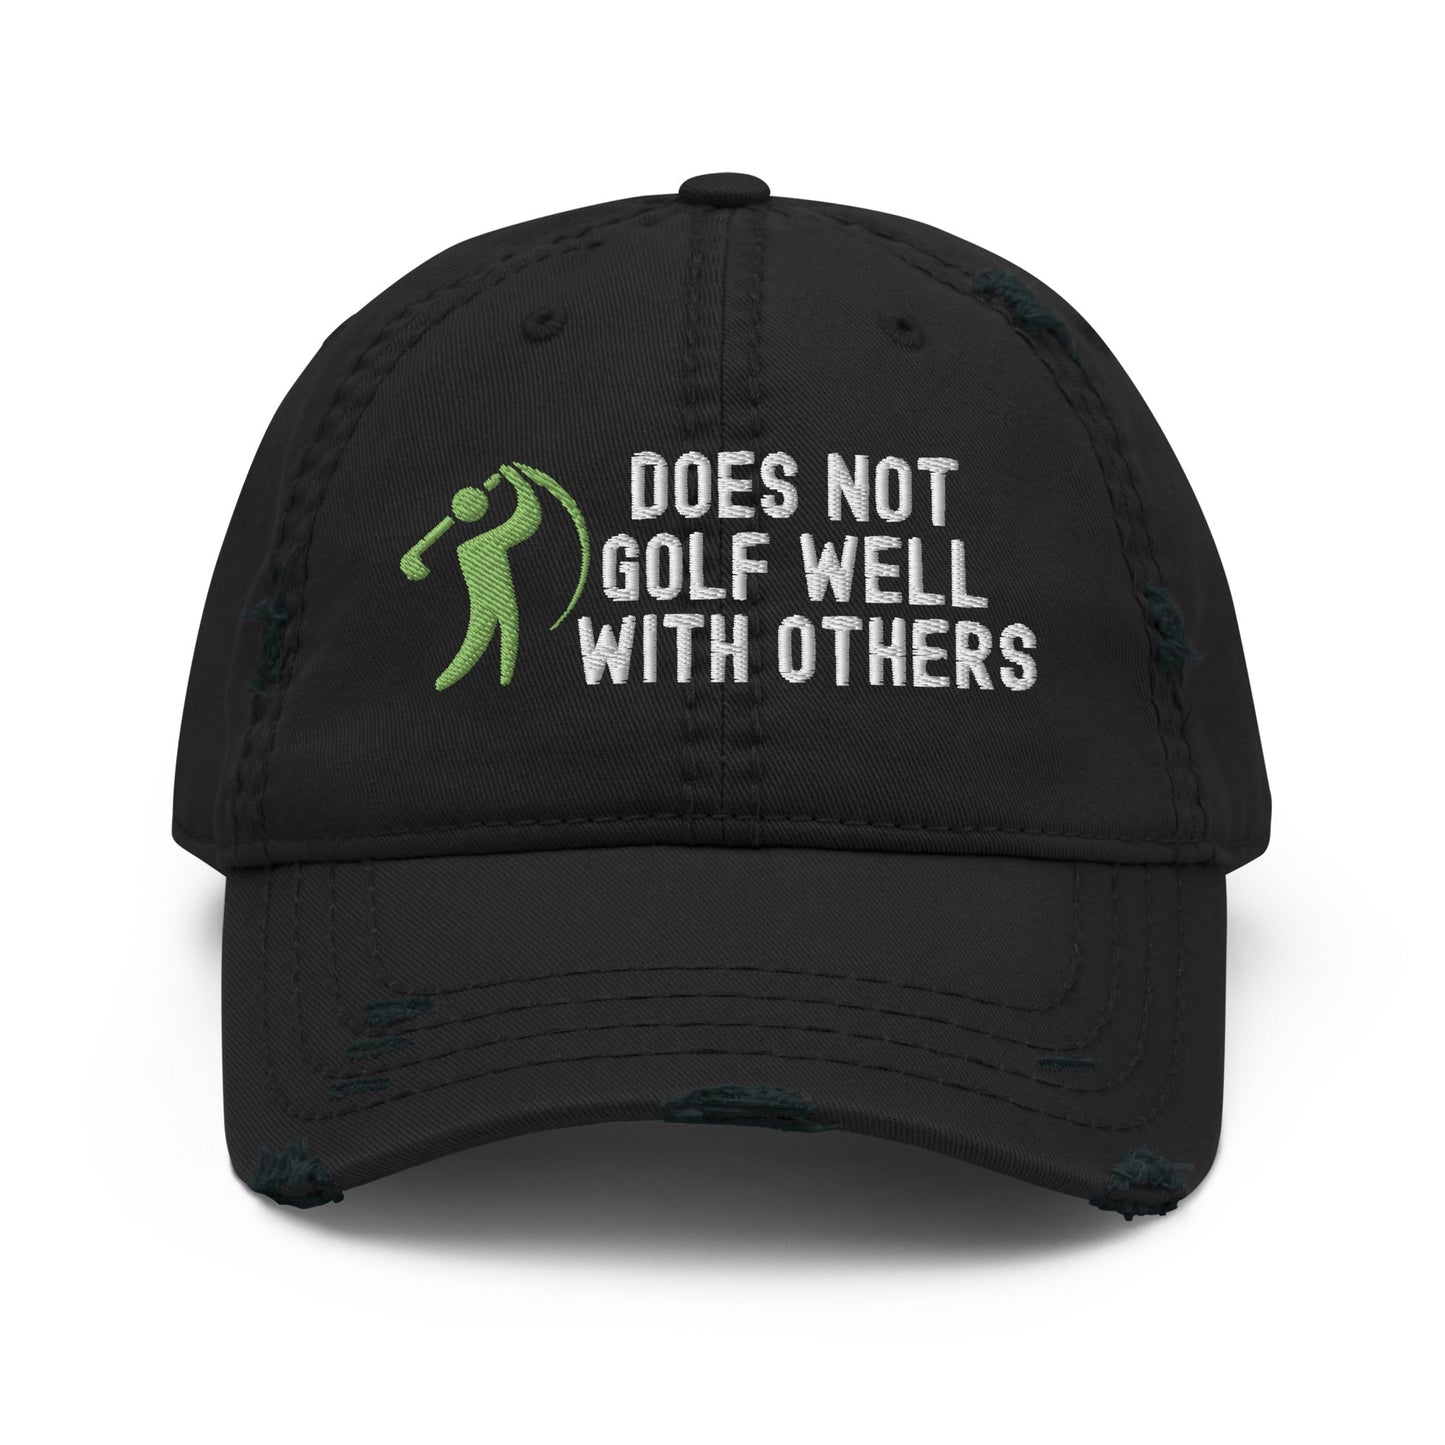 Funny Golfer Gifts  Distressed Cap Black Does Not Golf Well With Others Distressed Hat